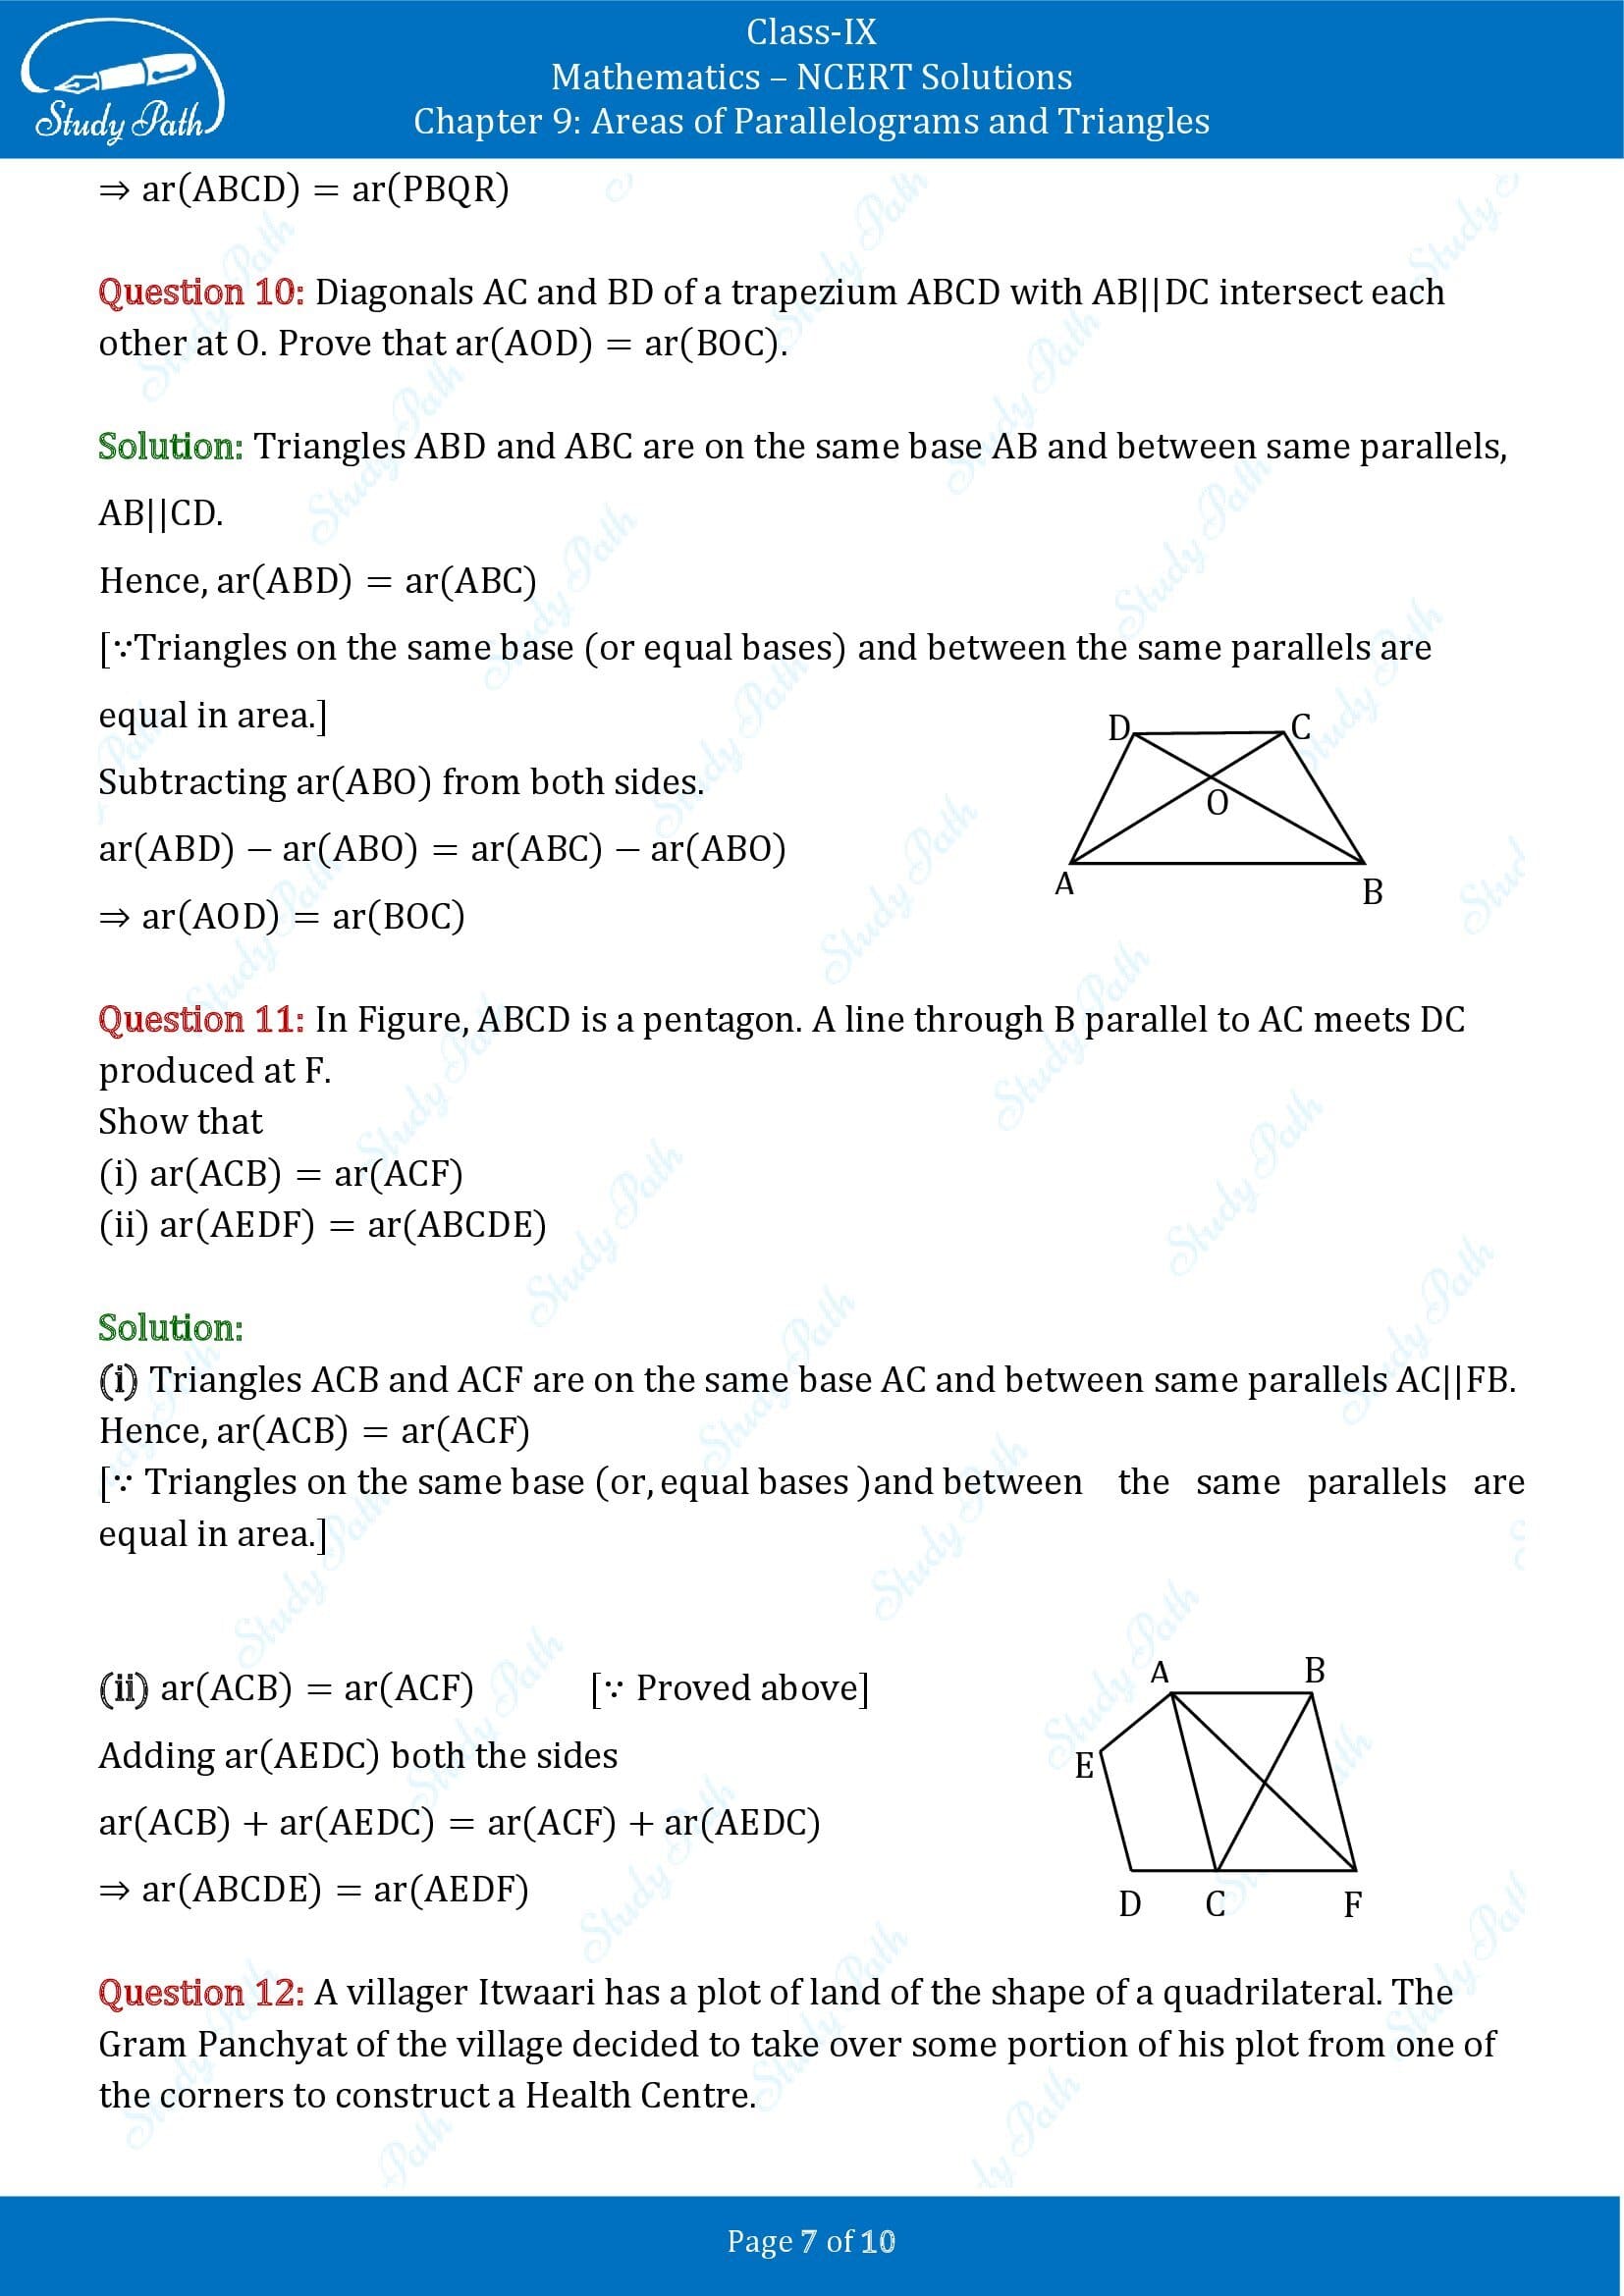 NCERT Solutions for Class 9 Maths Chapter 9 Areas of Parallelograms and Triangles Exercise 9.3 00007